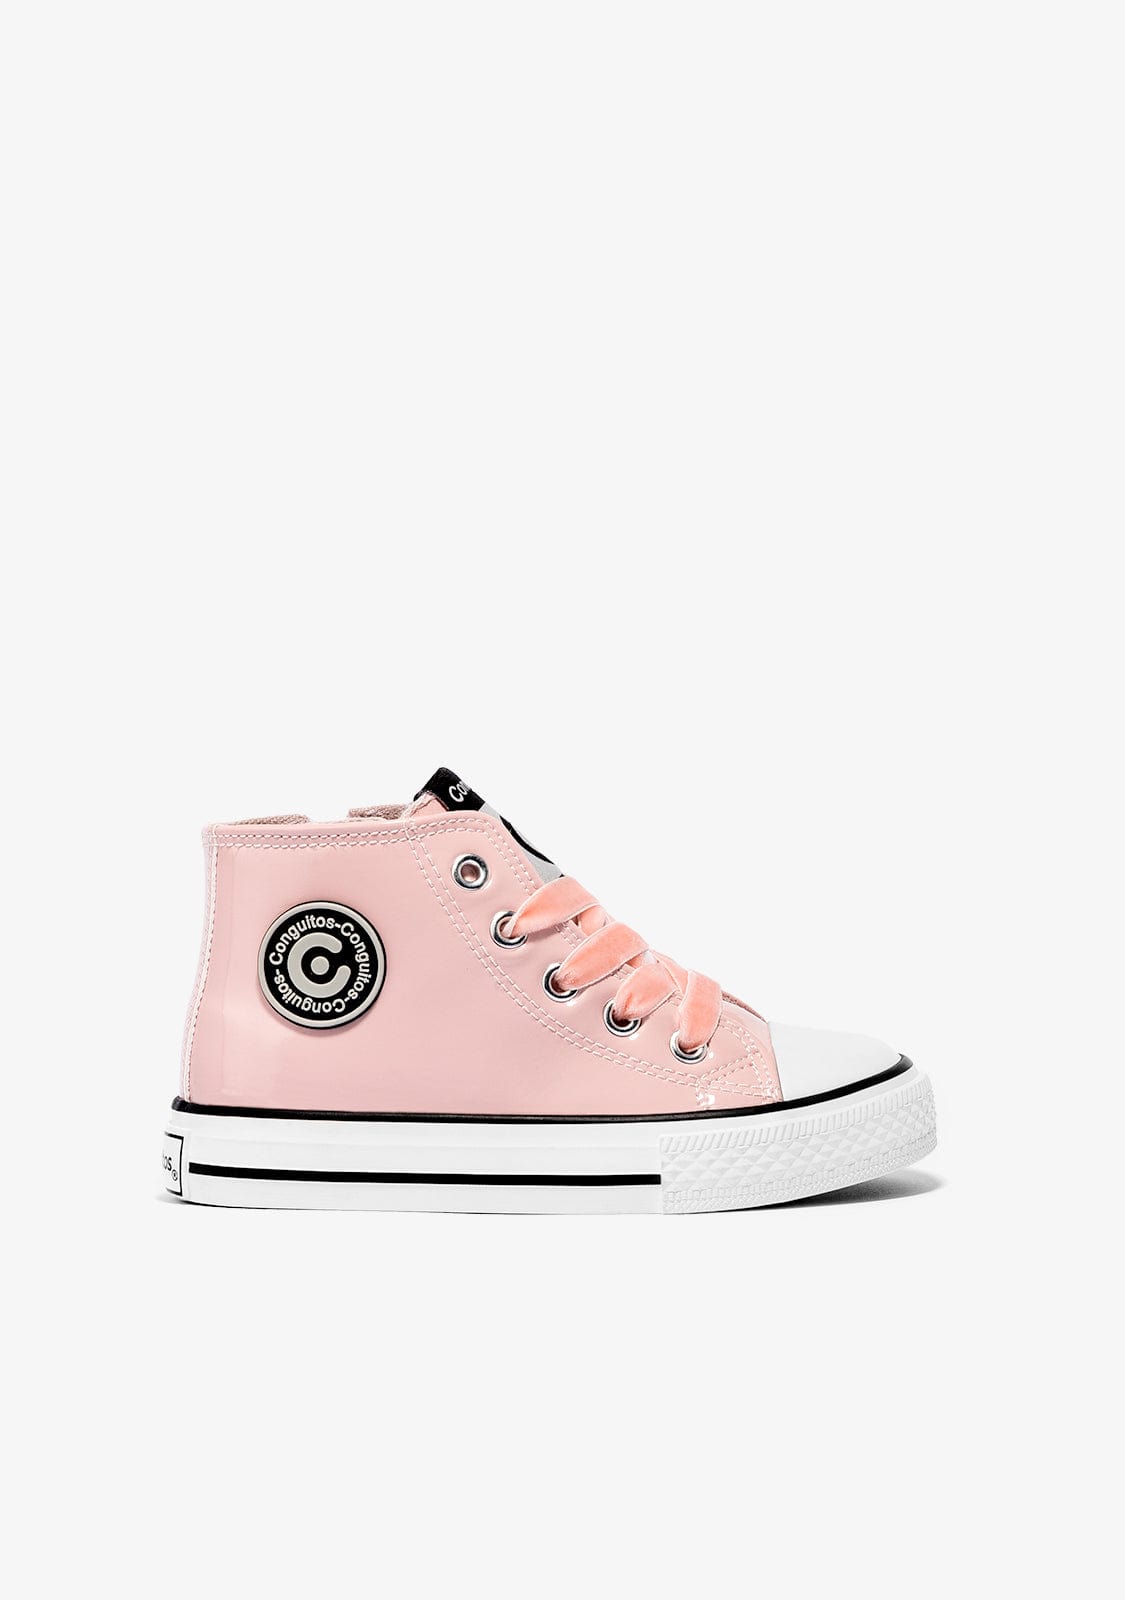 CONGUITOS Shoes Girl's Pink Patent High-Top Sneakers